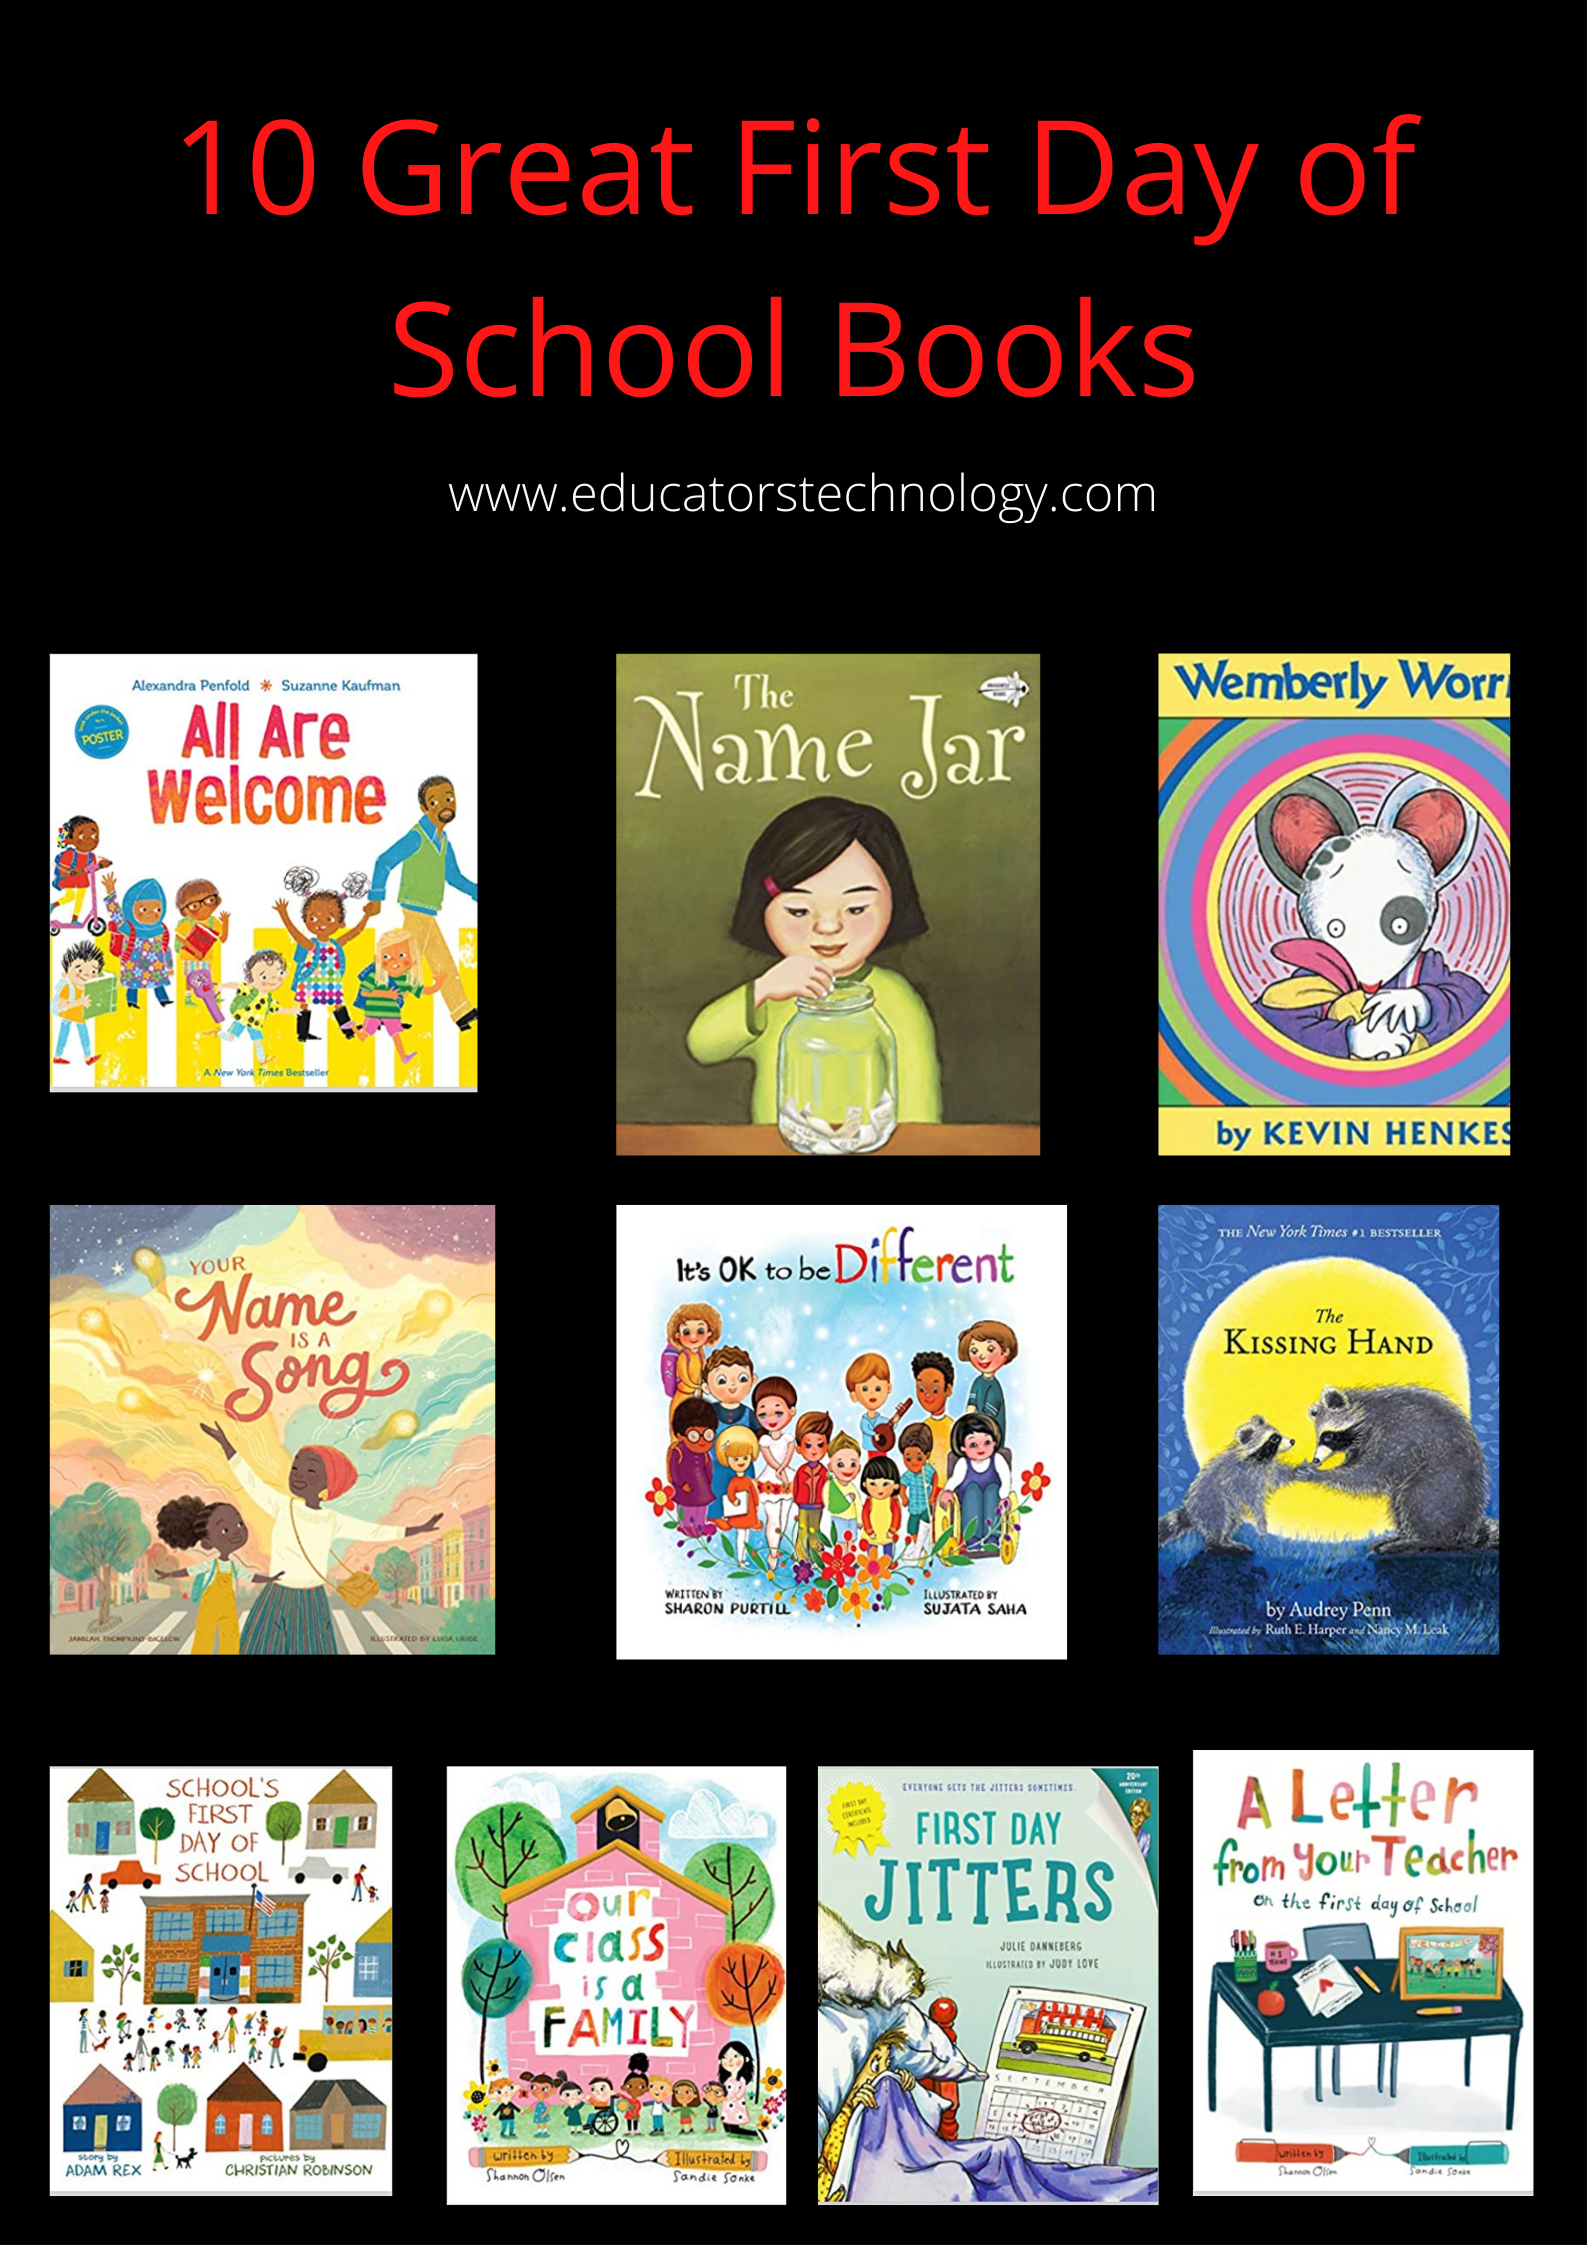 10 Great First Day of School Reads to Use With Your Students in Class